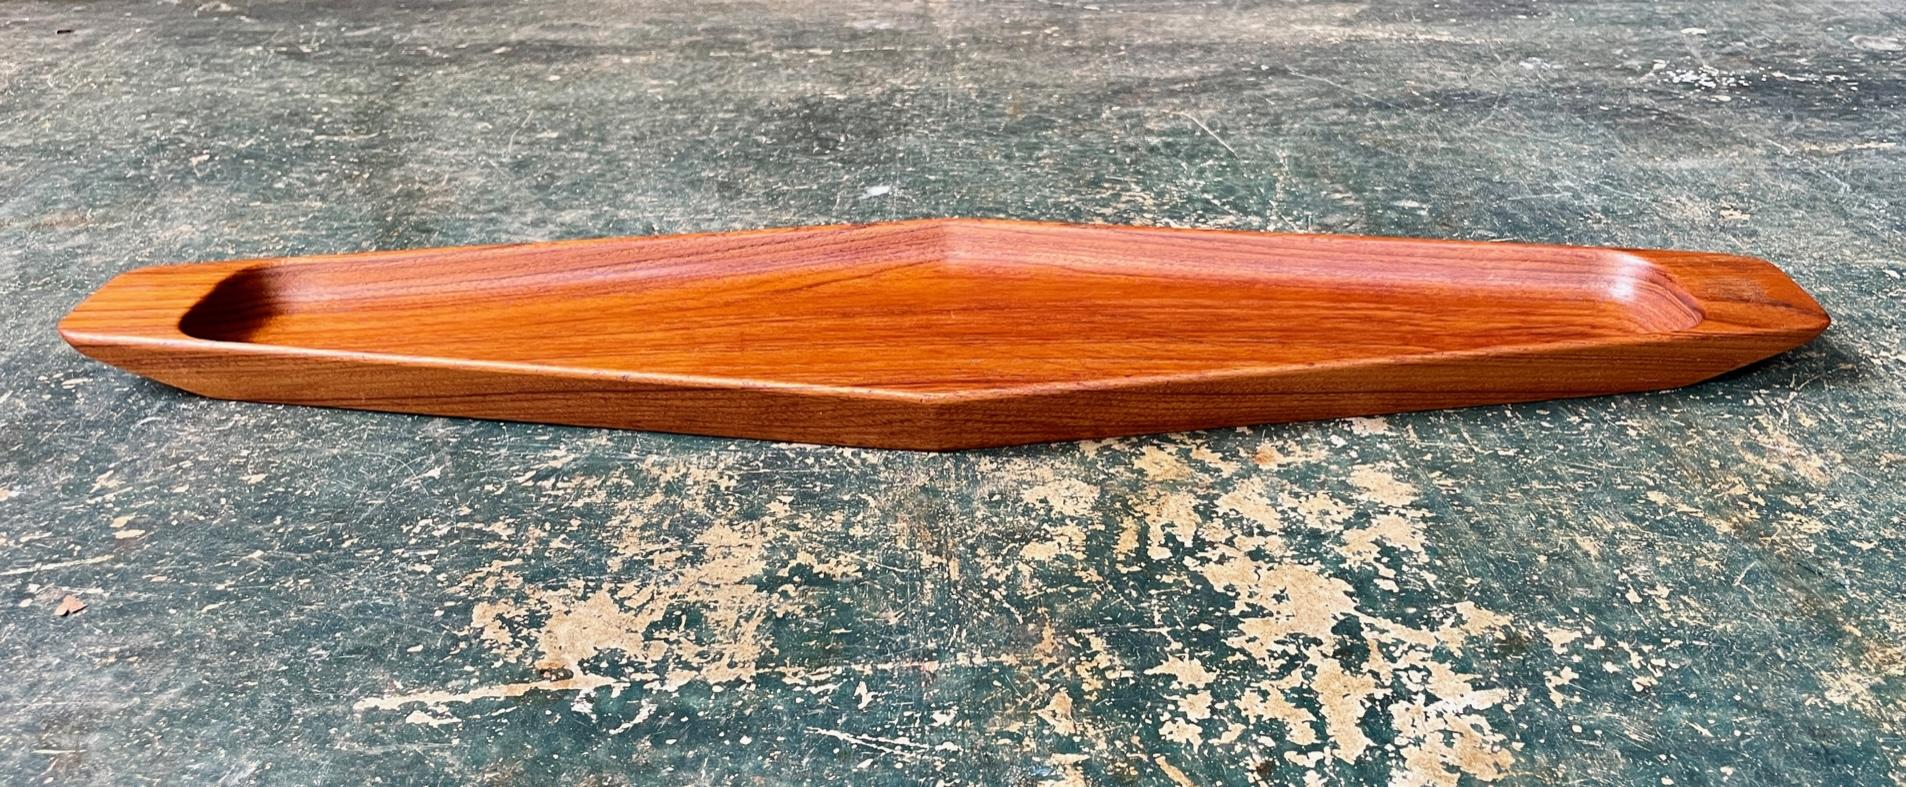 Very long geometric diamond tray. Made in Denmark. There is a swallow chip with some roughness to one corner, and scratches to center.

W 26 1/2 x D 6 3/4 x H 1 1/8 in.
